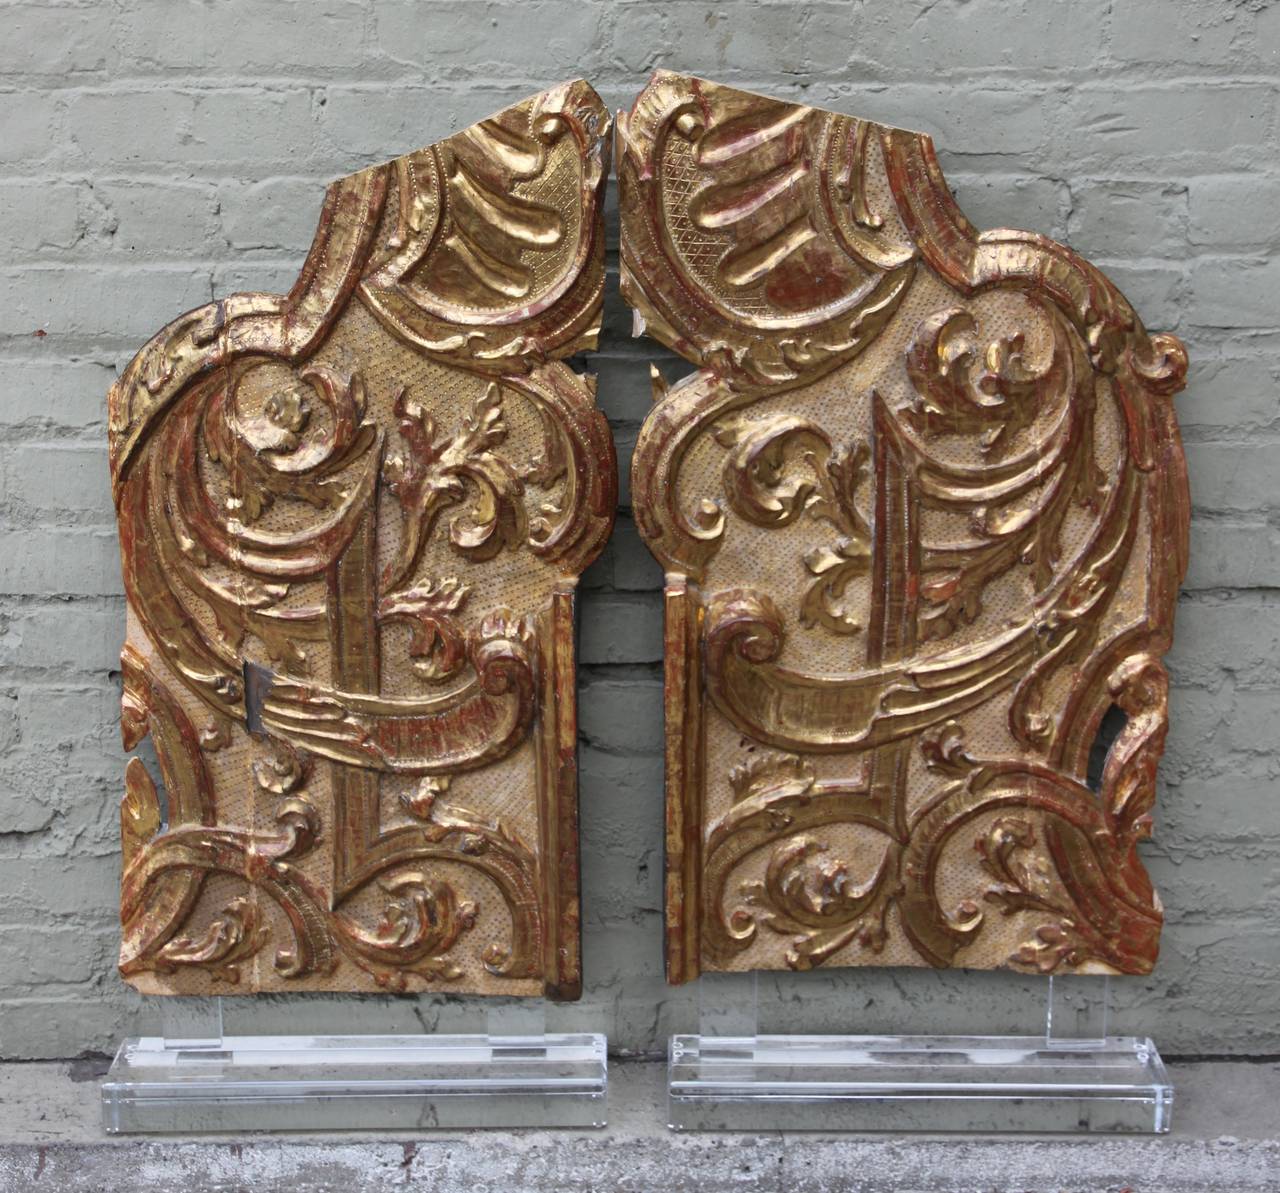 Pair of Italian monumental carved 22-karat gold leaf architectural pieces mounted on Lucite bases.